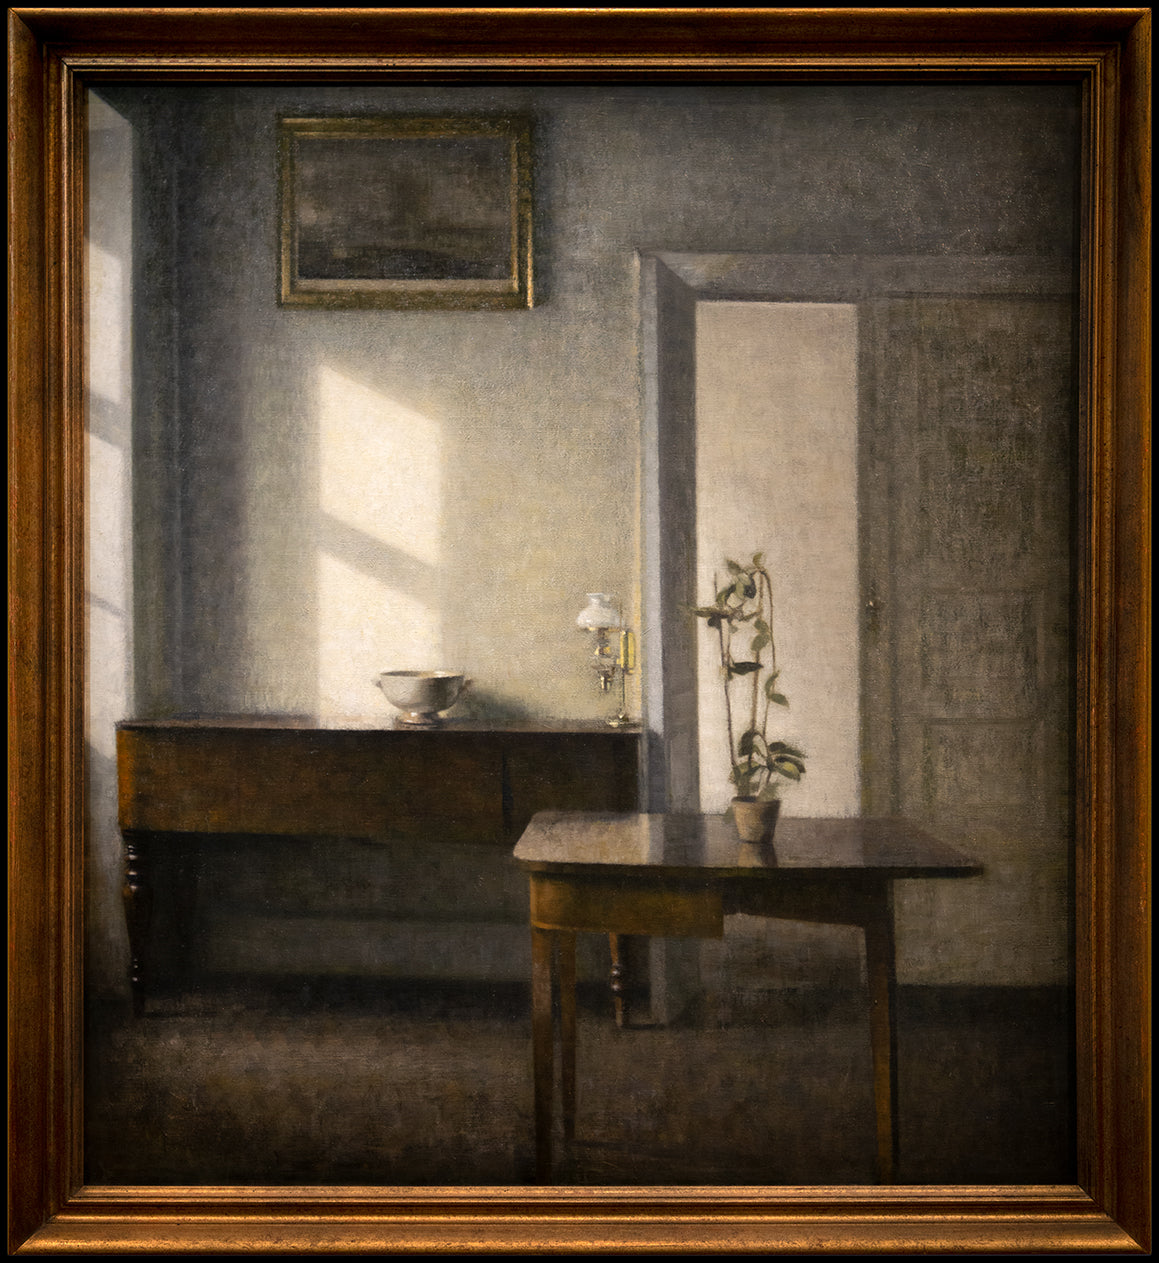 Vilhelm Hammershøi, Interior with Potted Plant on Card Table, Bredgade 25 (1910-1911). Collection of Malmö Konstmuseum